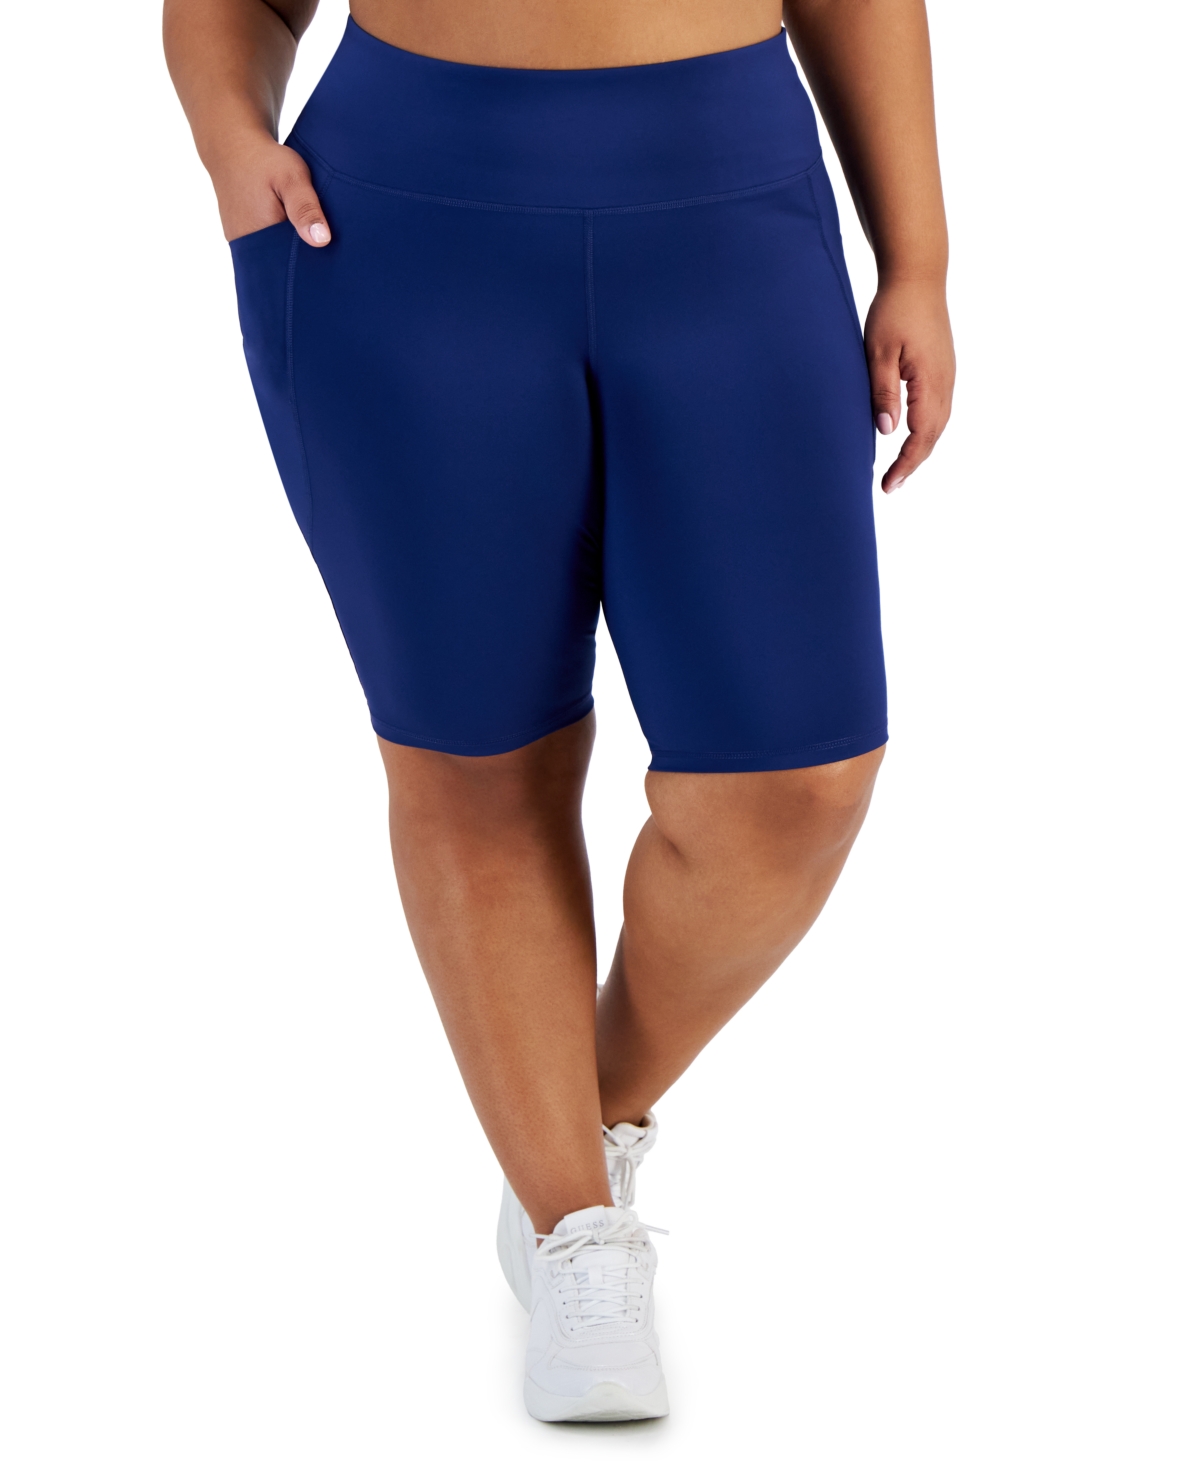 Plus Size Solid Compression Bike Shorts, Created for Macy's - Tartan Blue